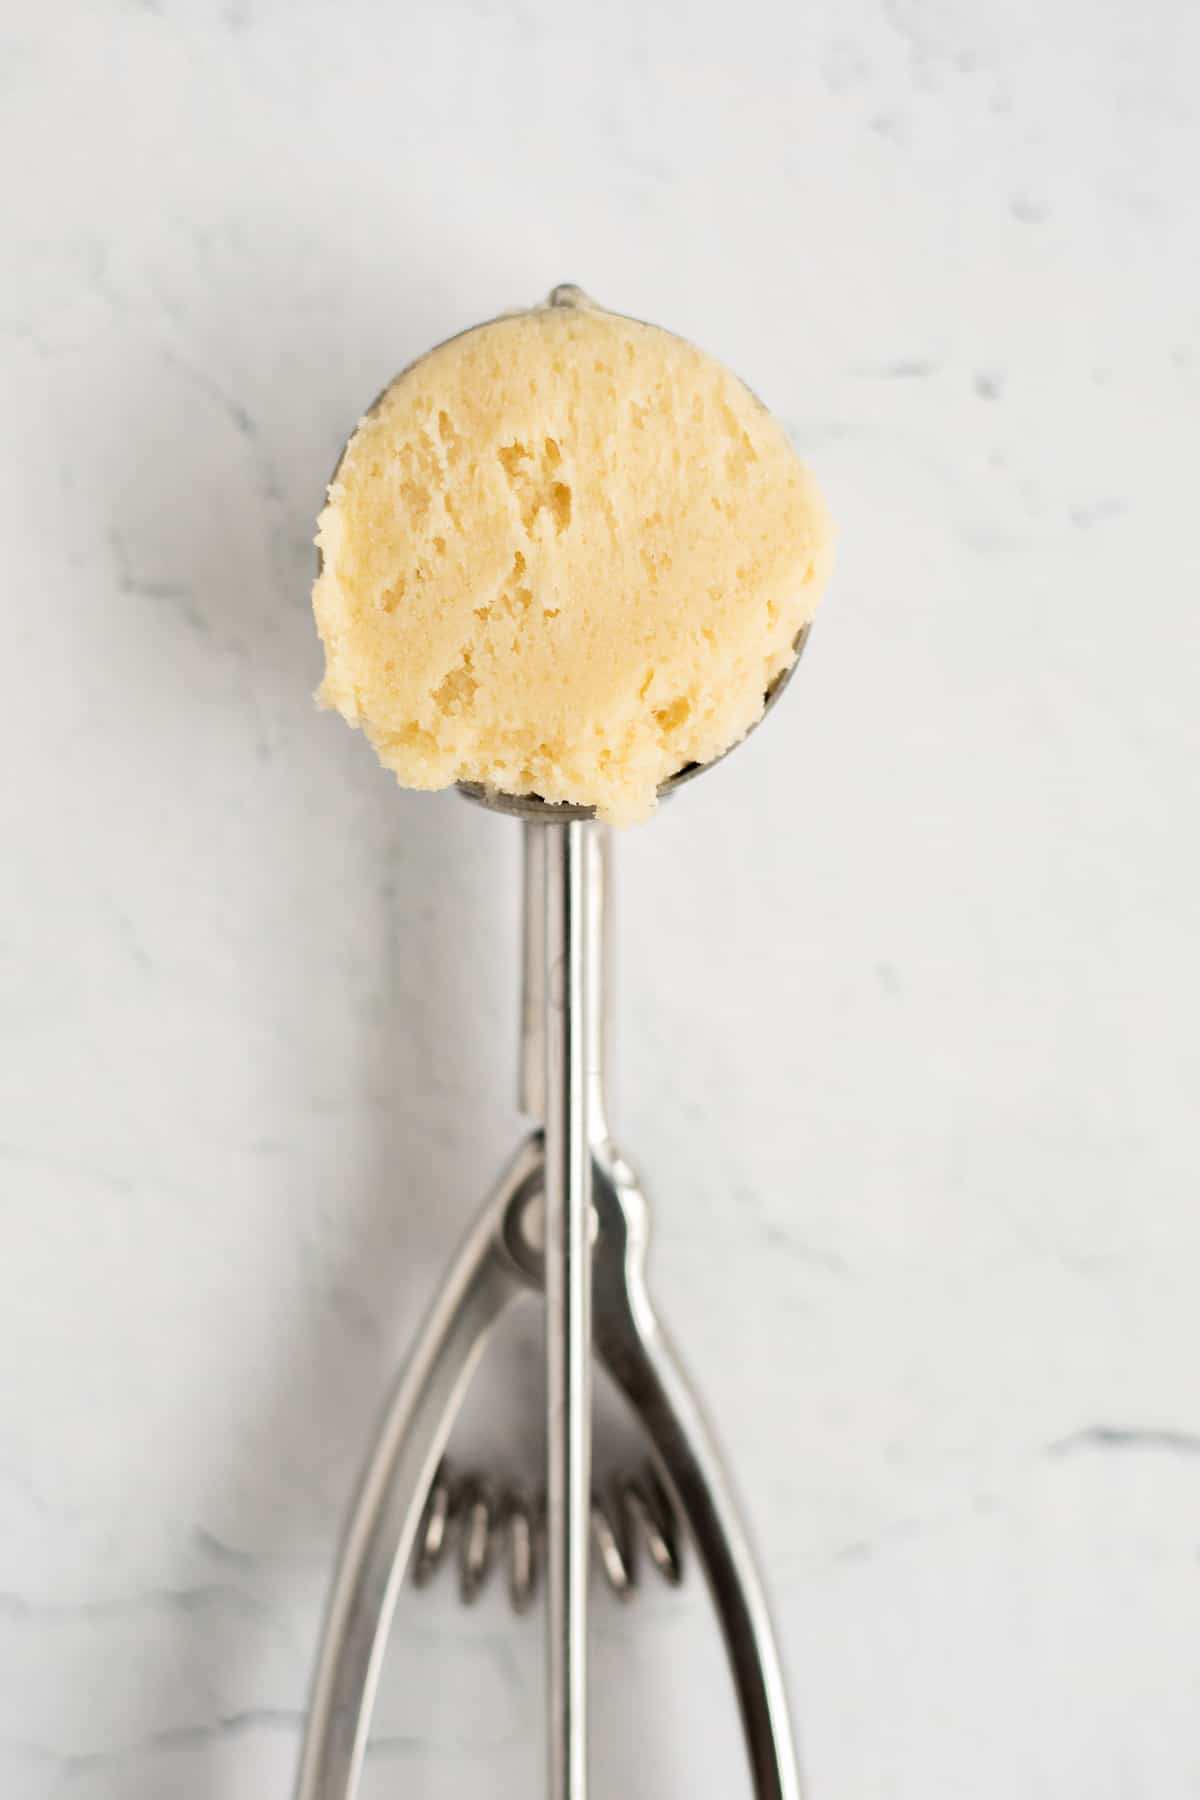 snickerdoodle cookie dough in a silver cookie scoop.